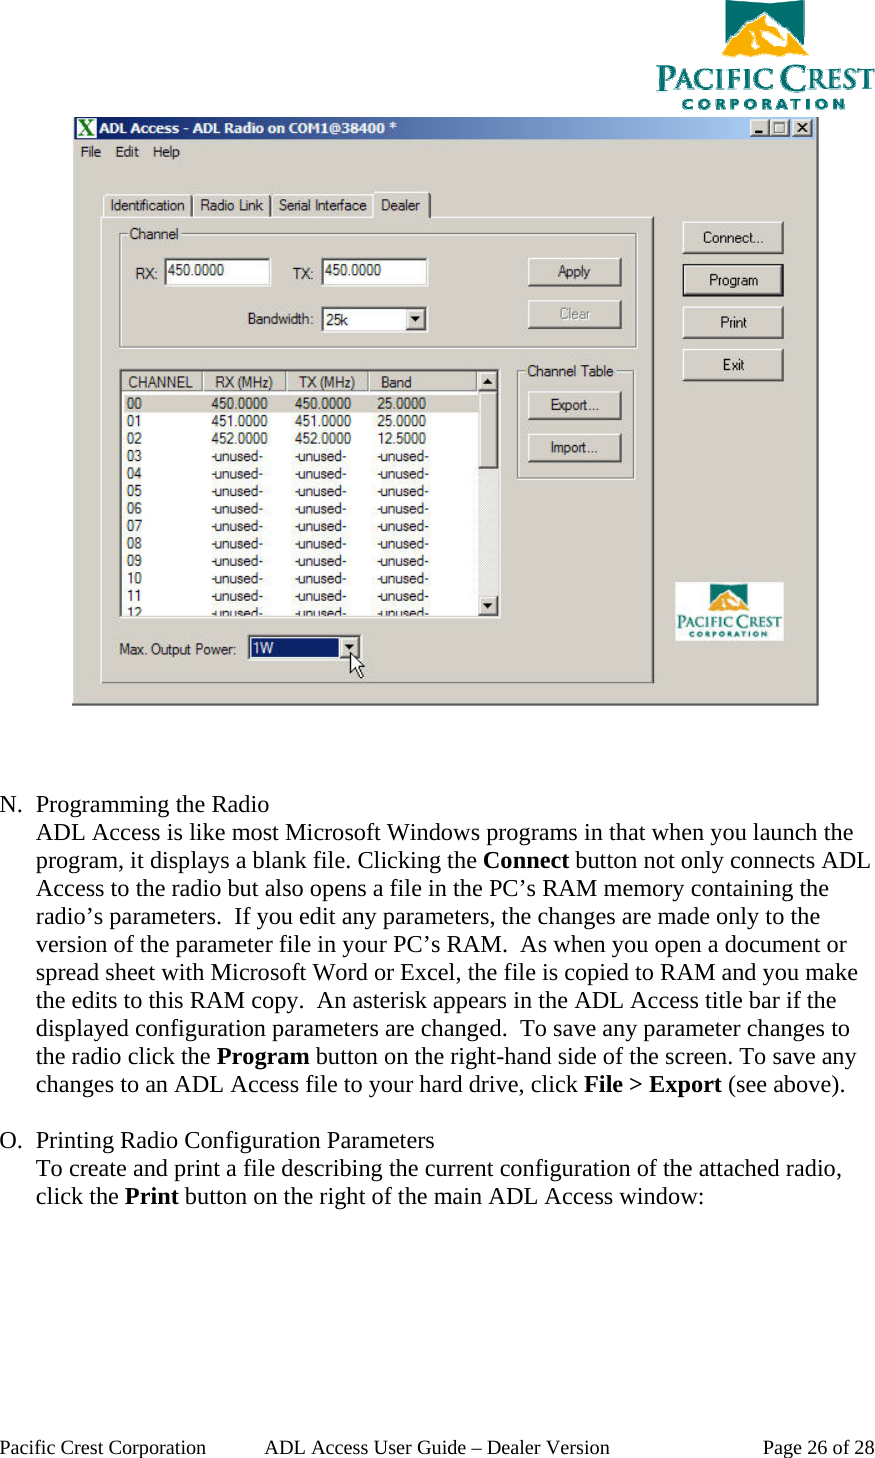  Pacific Crest Corporation  ADL Access User Guide – Dealer Version  Page 26 of 28     N. Programming the Radio ADL Access is like most Microsoft Windows programs in that when you launch the program, it displays a blank file. Clicking the Connect button not only connects ADL Access to the radio but also opens a file in the PC’s RAM memory containing the radio’s parameters.  If you edit any parameters, the changes are made only to the version of the parameter file in your PC’s RAM.  As when you open a document or spread sheet with Microsoft Word or Excel, the file is copied to RAM and you make the edits to this RAM copy.  An asterisk appears in the ADL Access title bar if the displayed configuration parameters are changed.  To save any parameter changes to the radio click the Program button on the right-hand side of the screen. To save any changes to an ADL Access file to your hard drive, click File &gt; Export (see above).    O. Printing Radio Configuration Parameters To create and print a file describing the current configuration of the attached radio, click the Print button on the right of the main ADL Access window: 